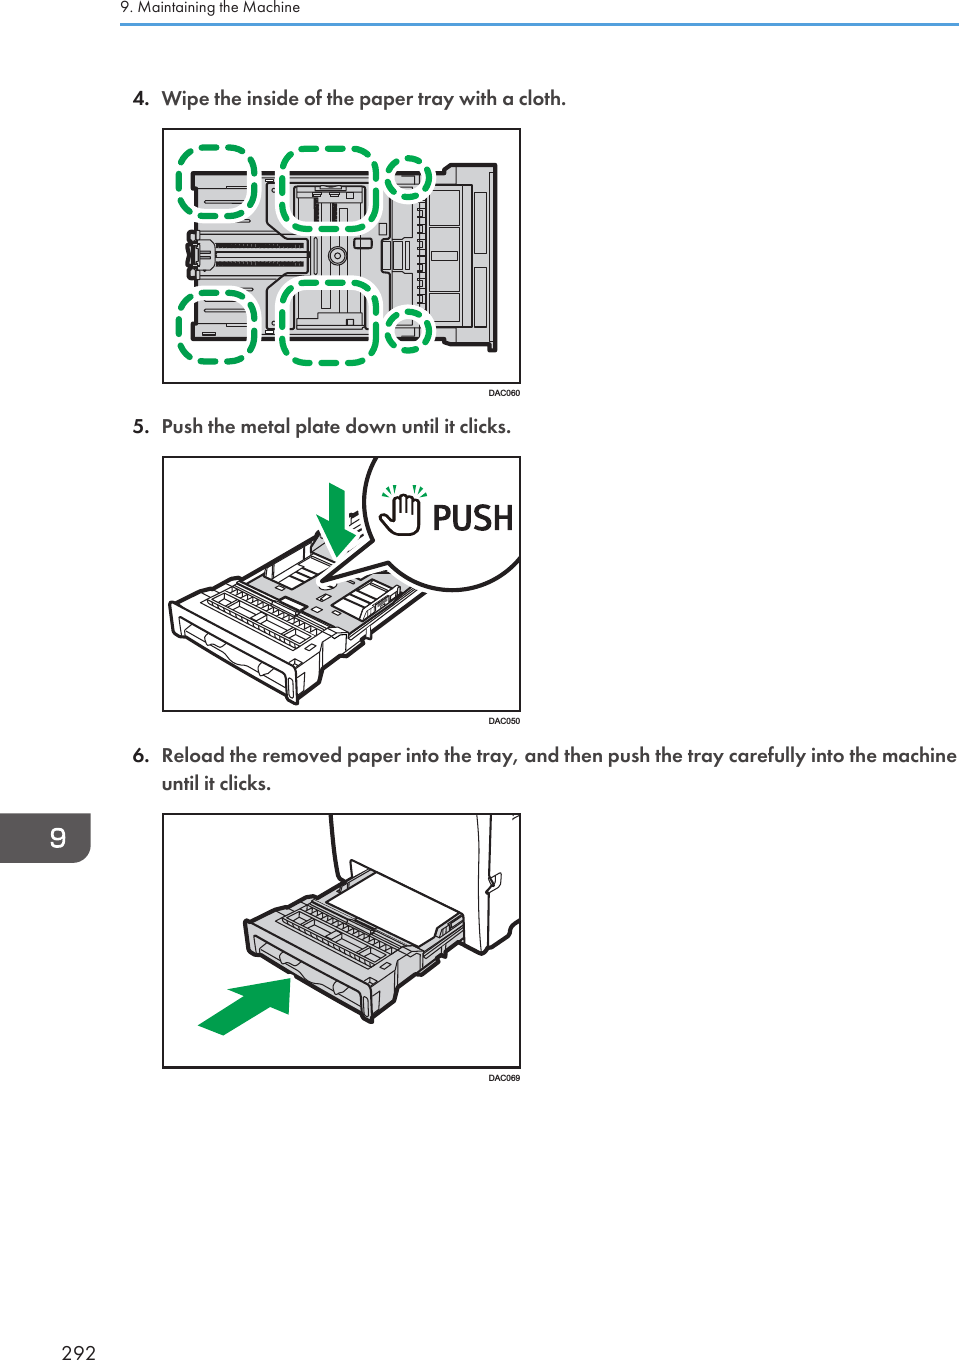 4. Wipe the inside of the paper tray with a cloth.DAC0605. Push the metal plate down until it clicks.DAC0506. Reload the removed paper into the tray, and then push the tray carefully into the machineuntil it clicks.DAC0699. Maintaining the Machine292